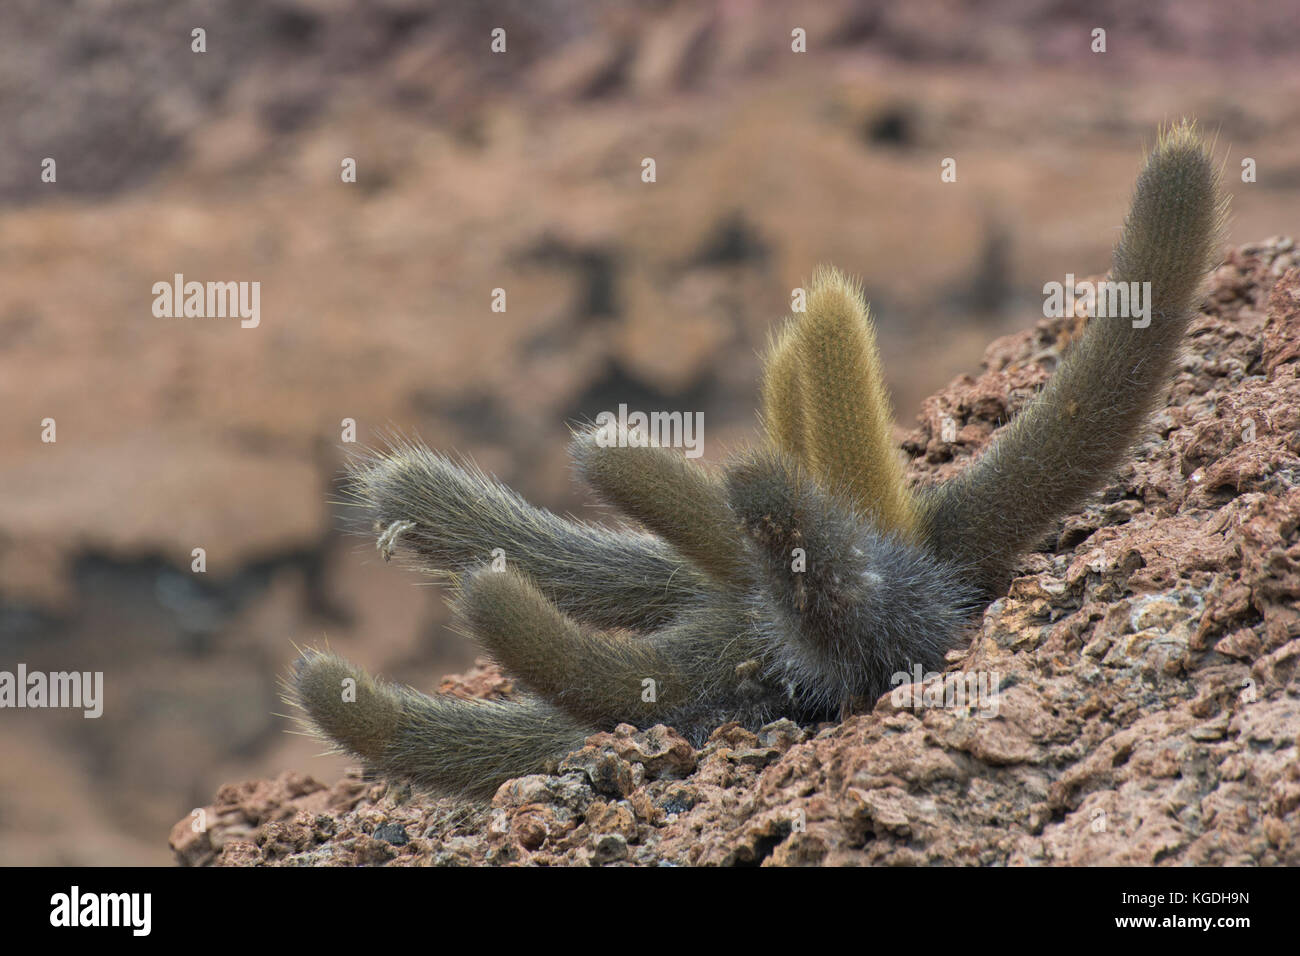 Brachycereus nesioticus also known as the Lava cactus is often the 1st and only plant to show up and be able to survive on new lava flows. Stock Photo